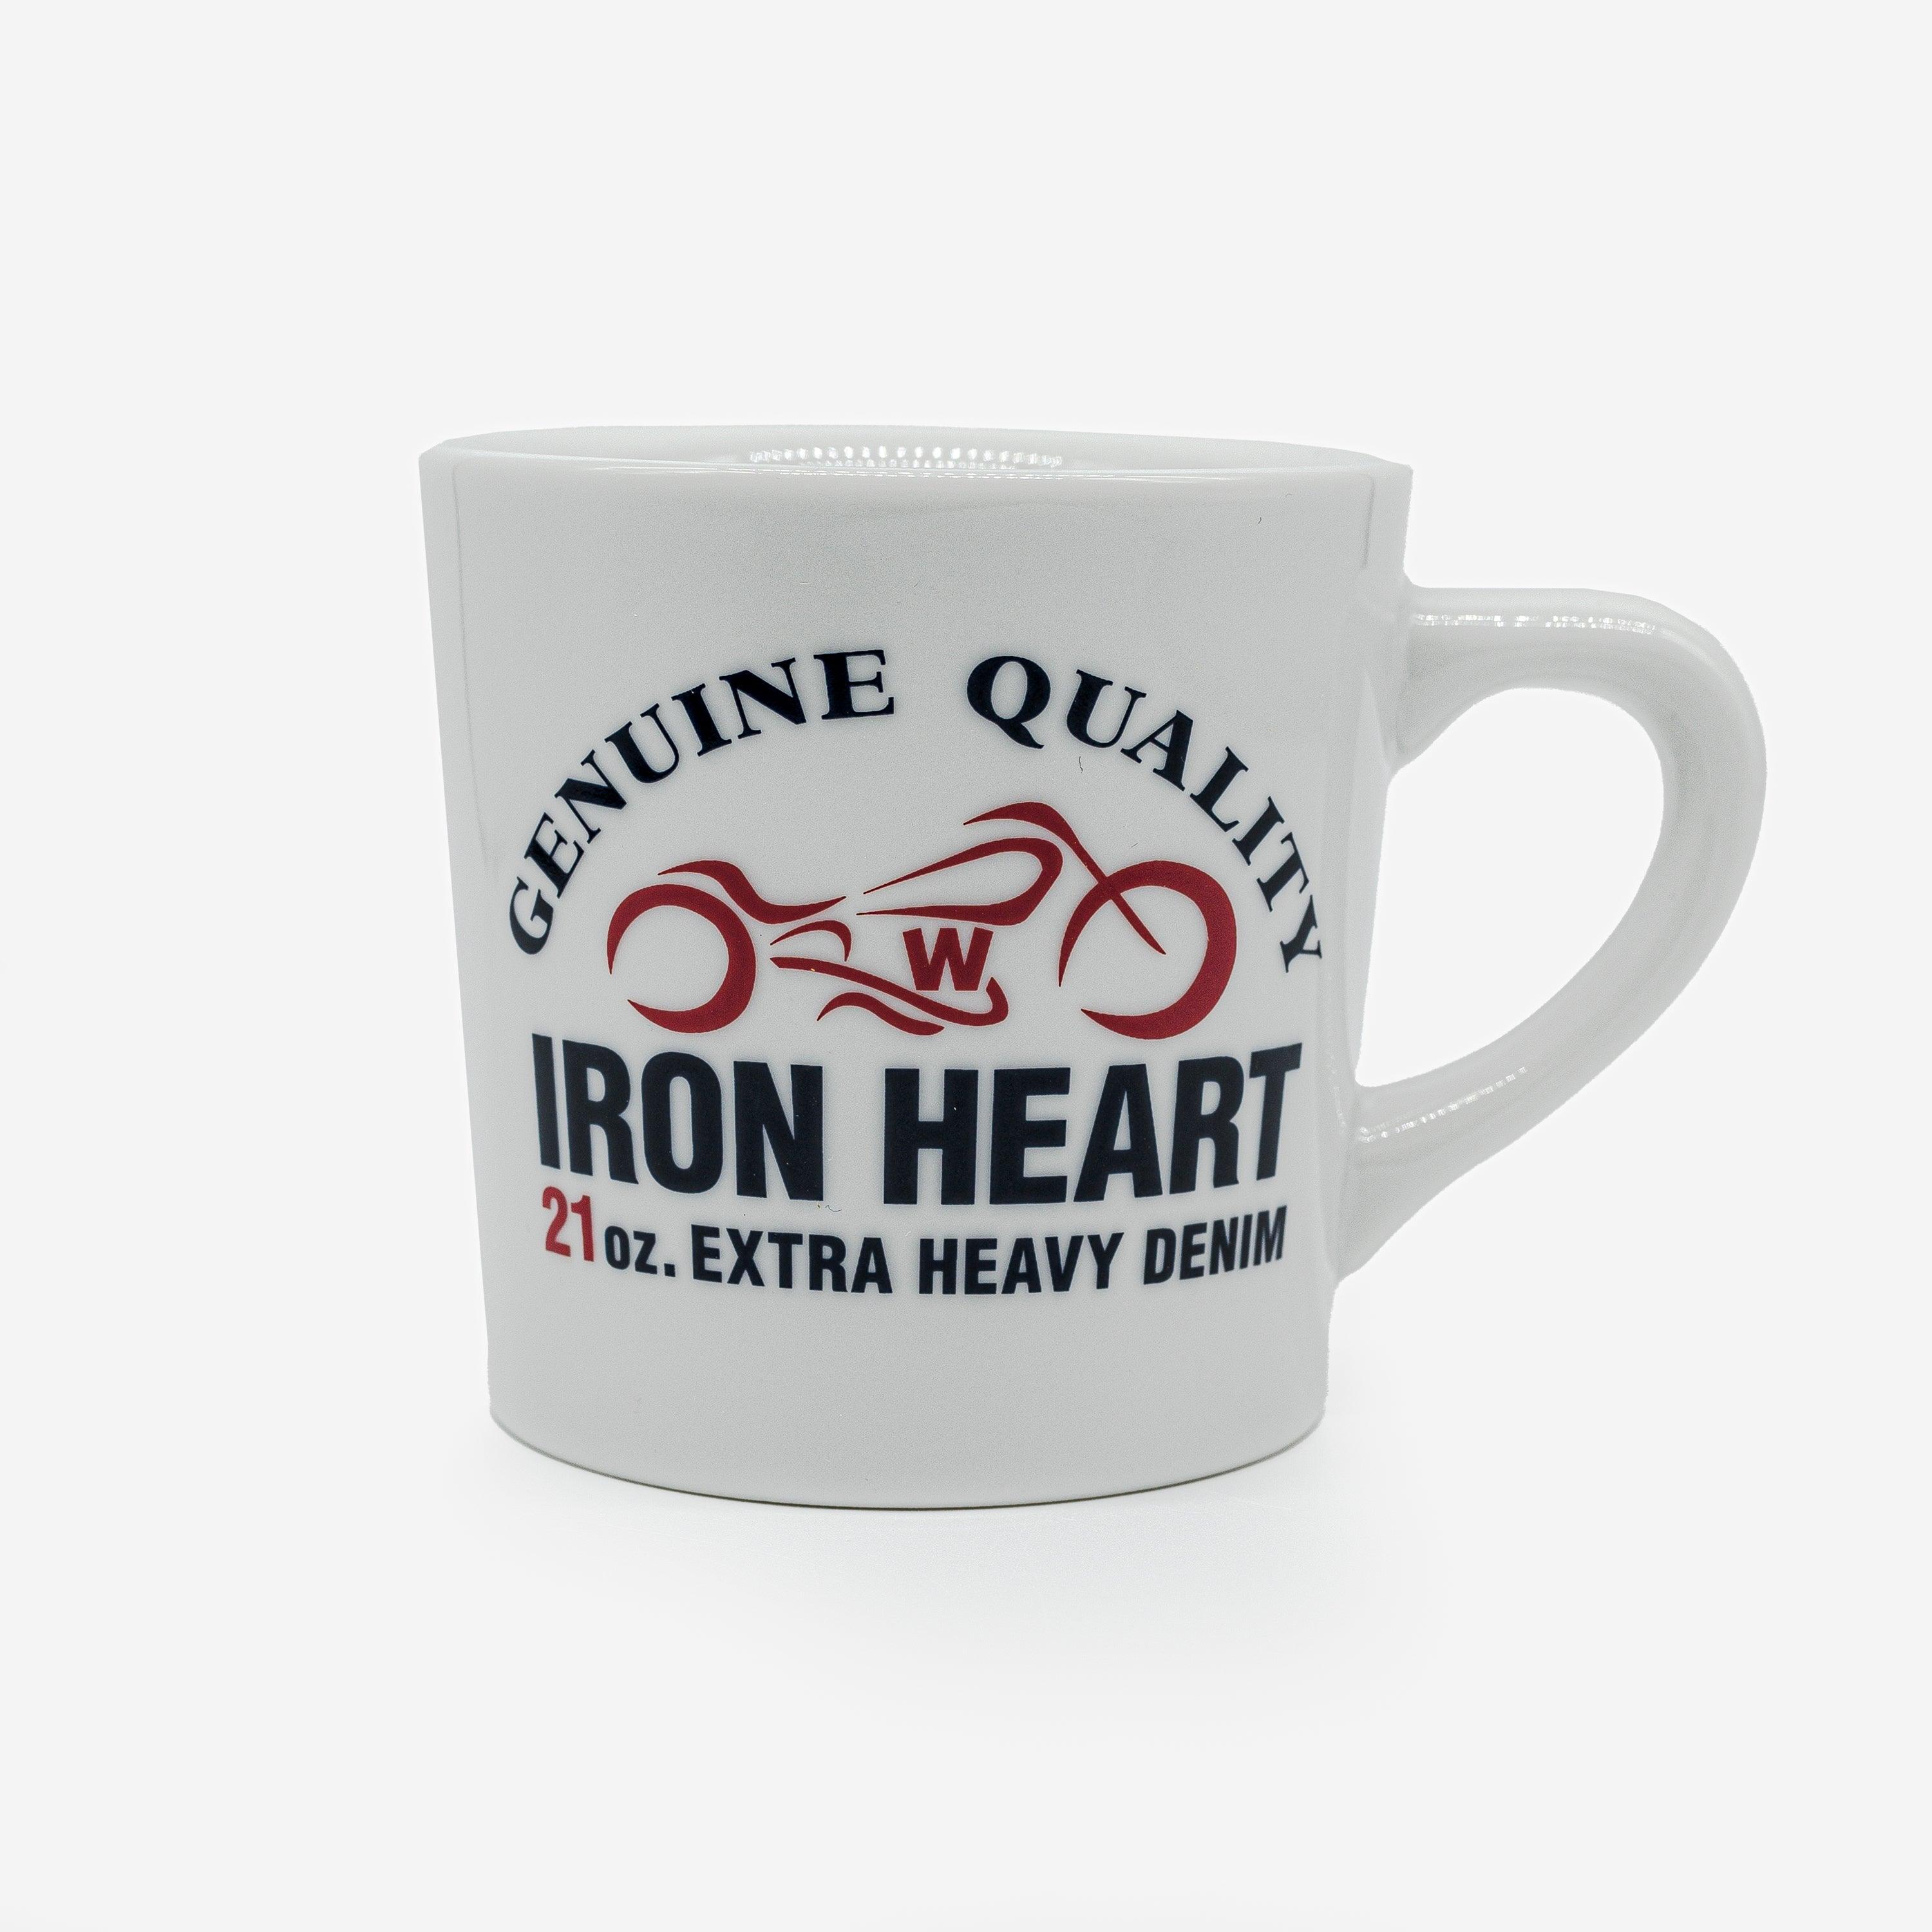 Iron Heart - Motorcycle Coffee Mug - Guilty Party